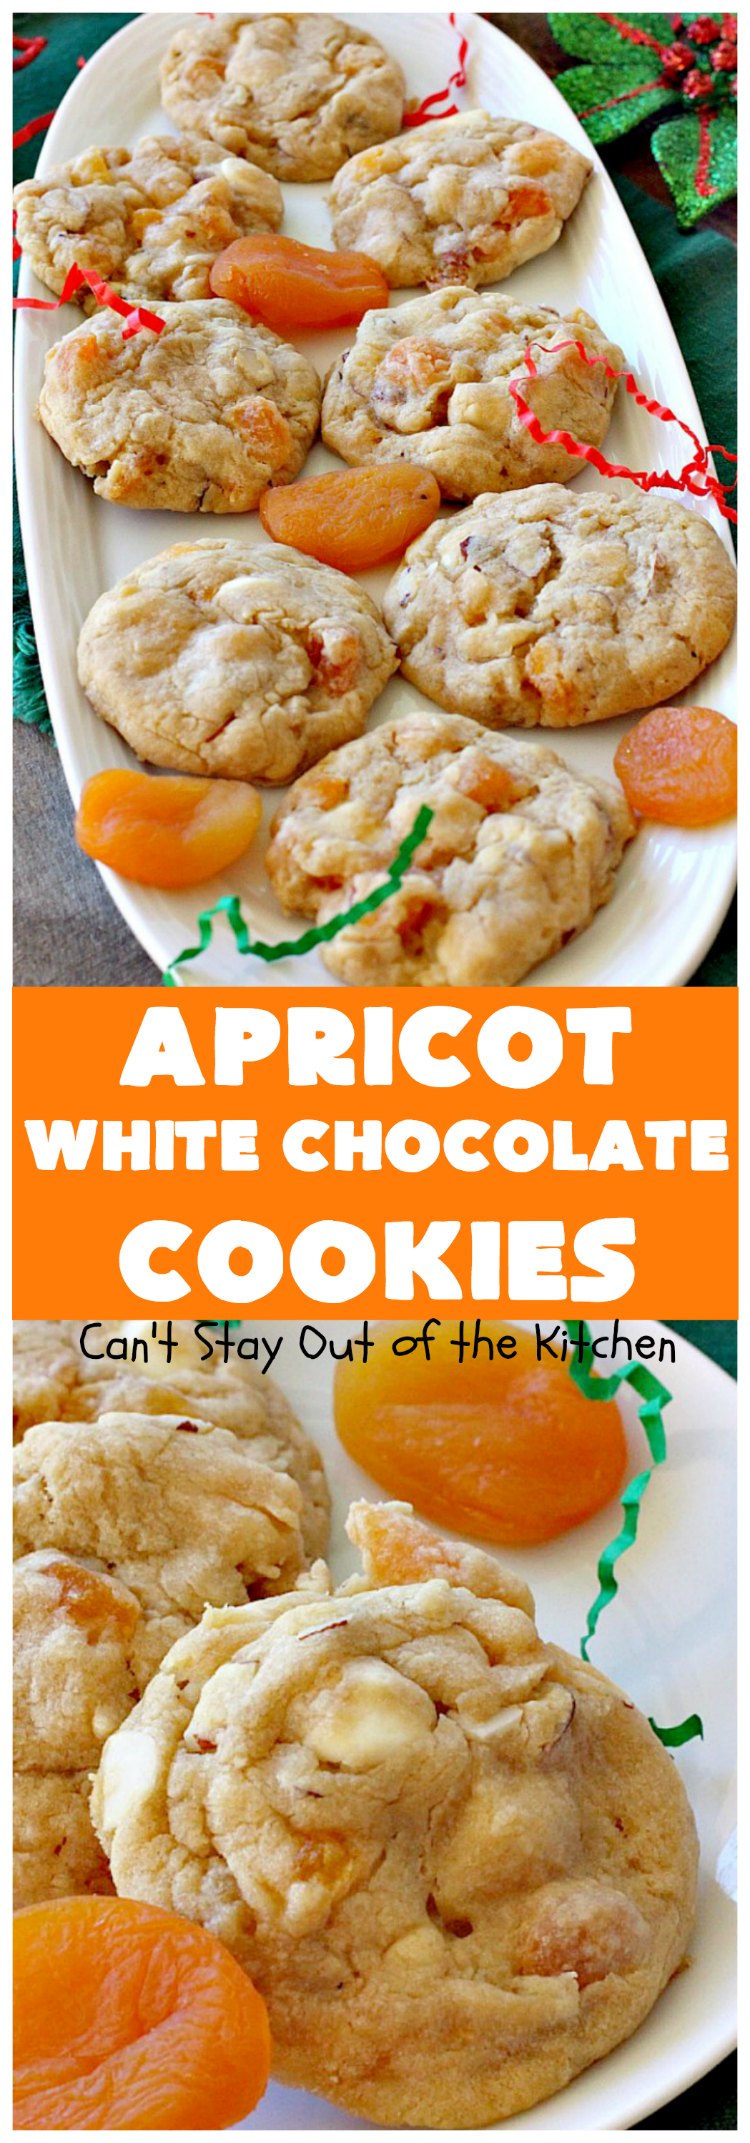 Apricot White Chocolate Cookies | Can't Stay Out of the Kitchen